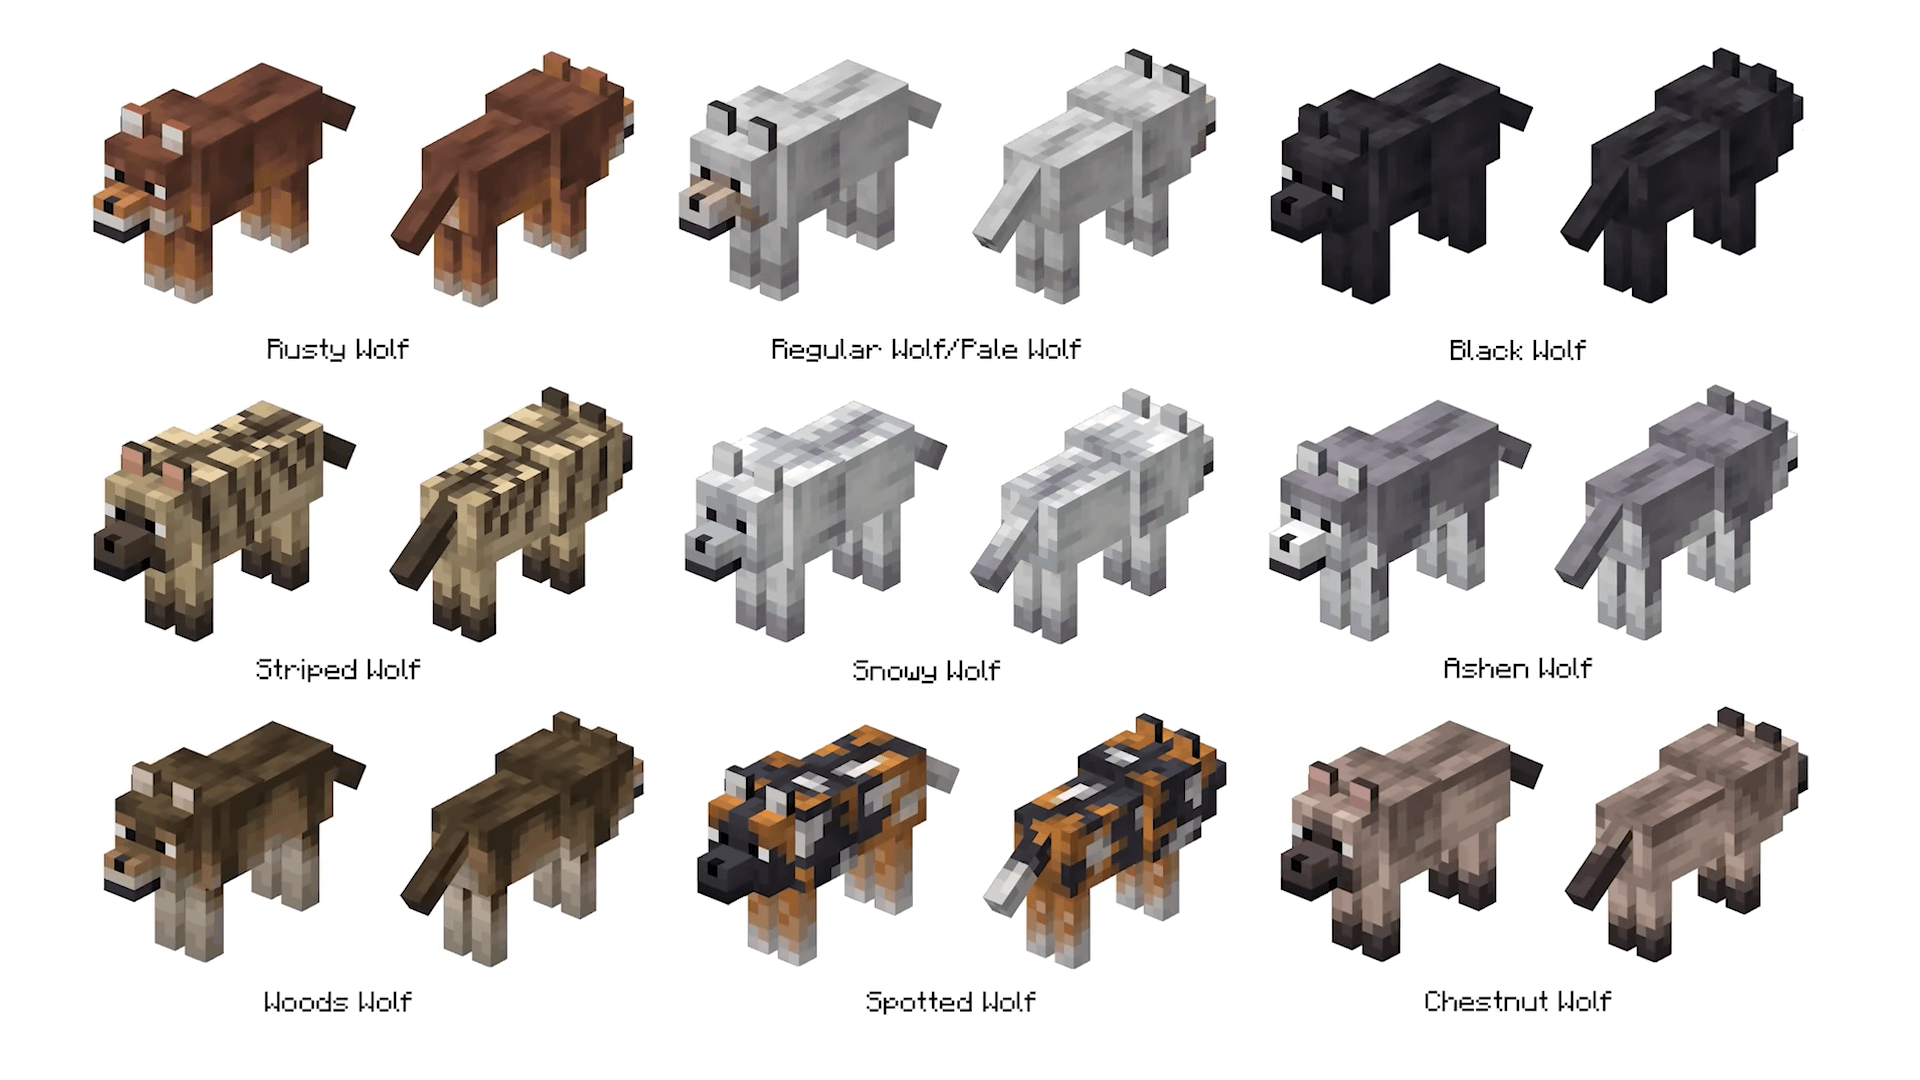 all-wolf-variants-as-of-the-latest-snapshot-v0-jaq5h5vggqmc1.png